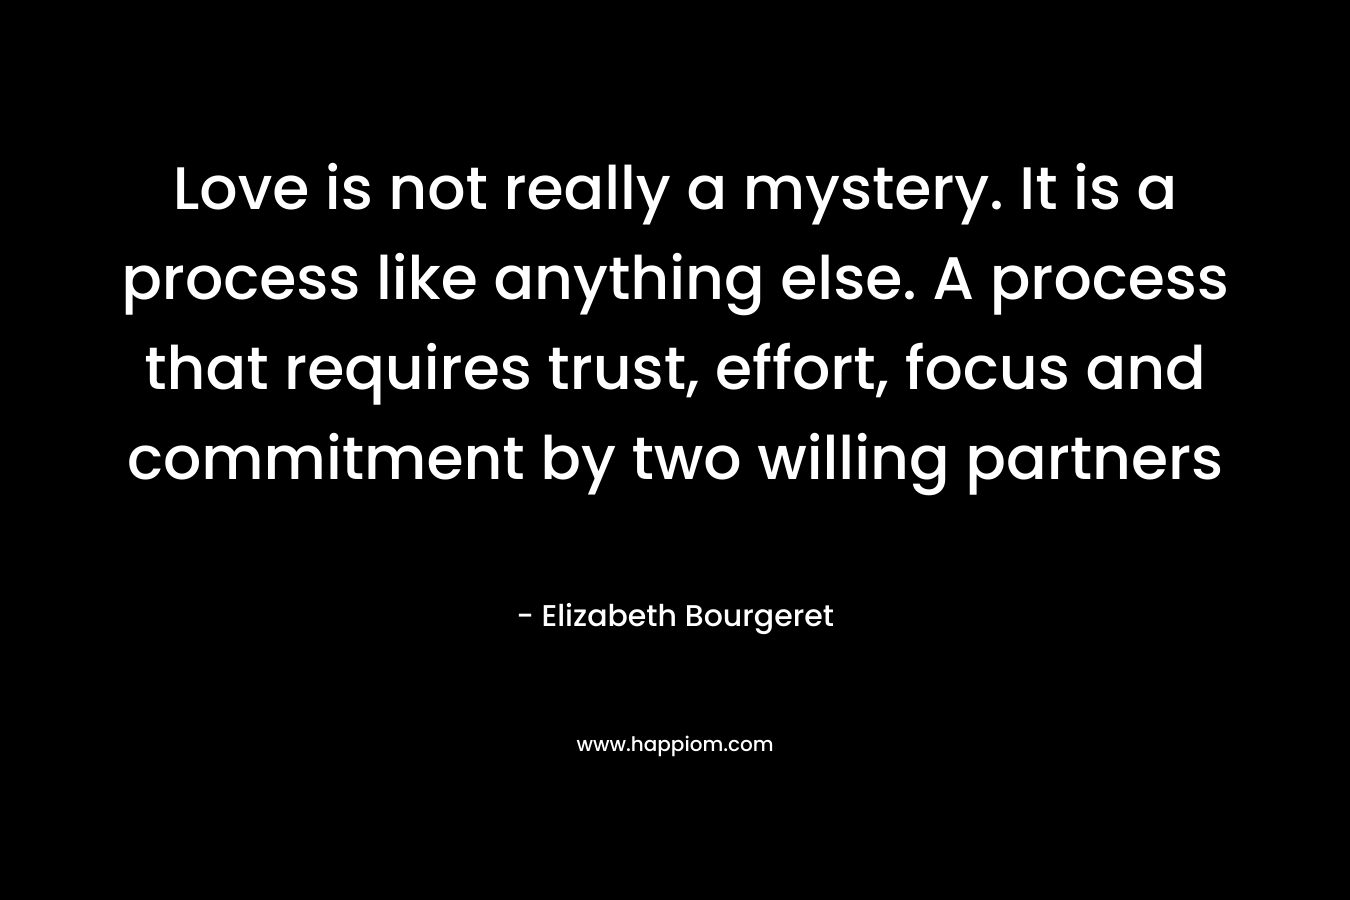 Love is not really a mystery. It is a process like anything else. A process that requires trust, effort, focus and commitment by two willing partners